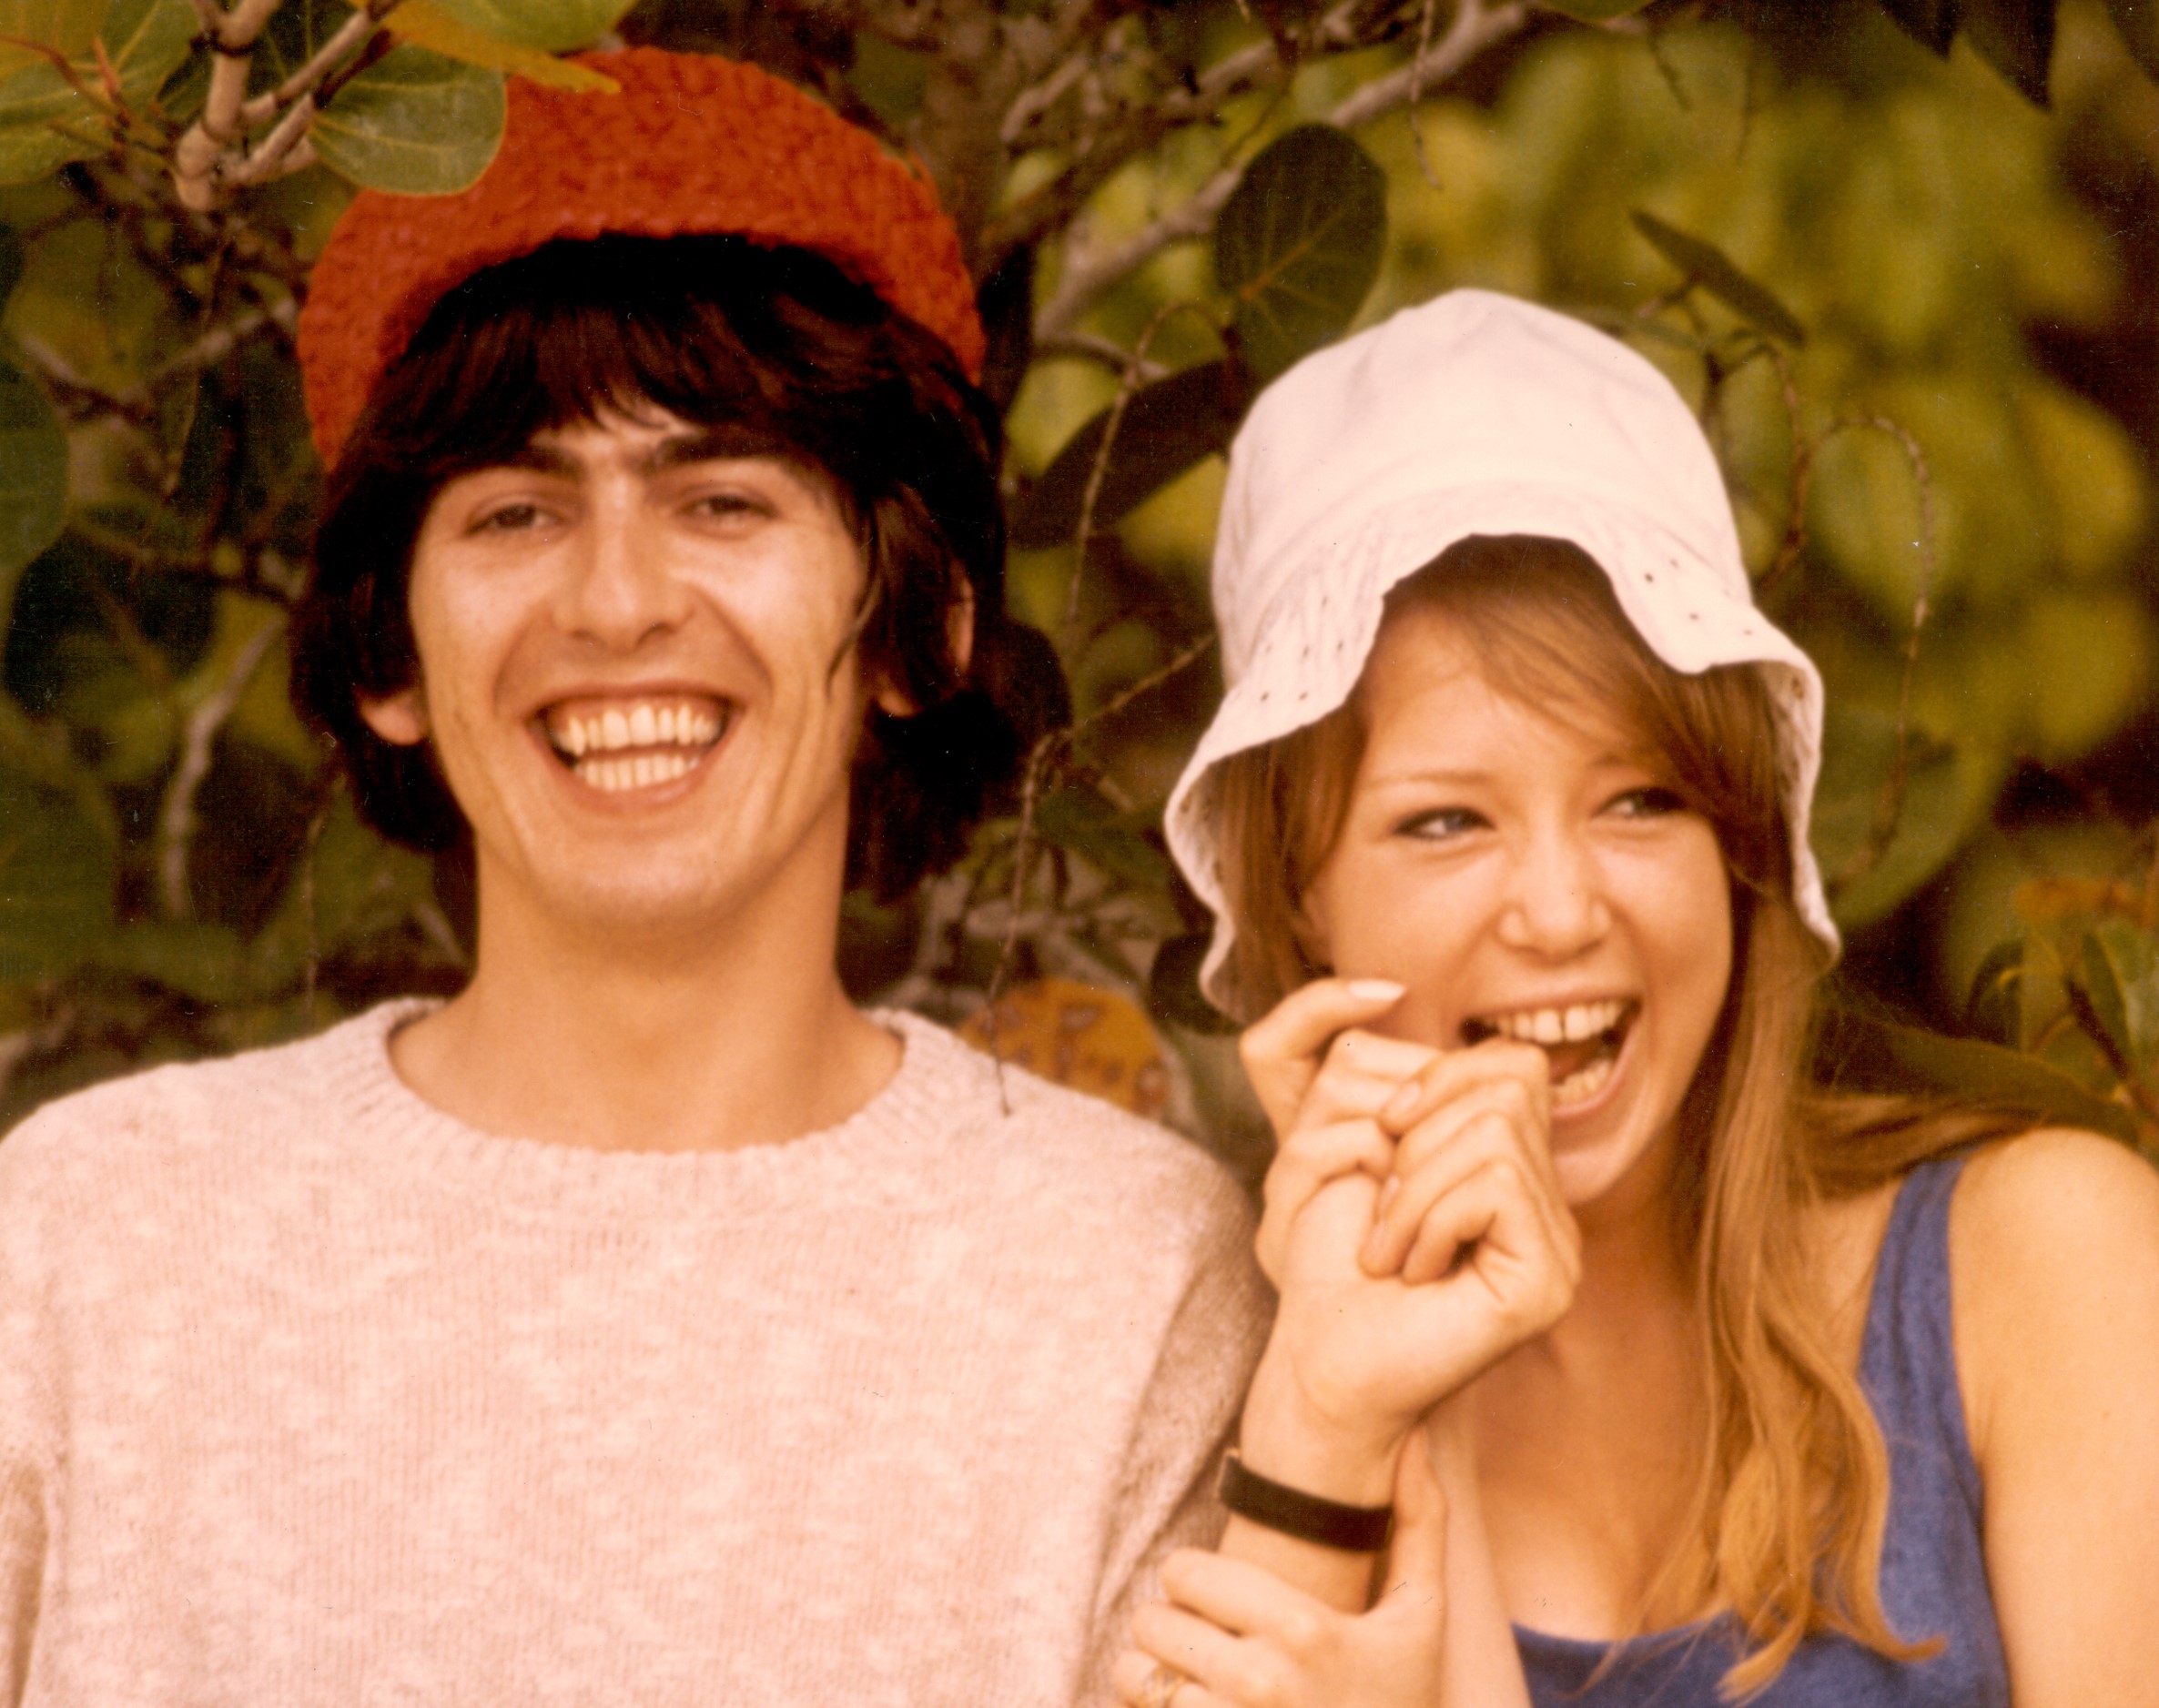 George Harrison and Pattie Boyd stand in front of a tree and wear hats. She bits his finger.